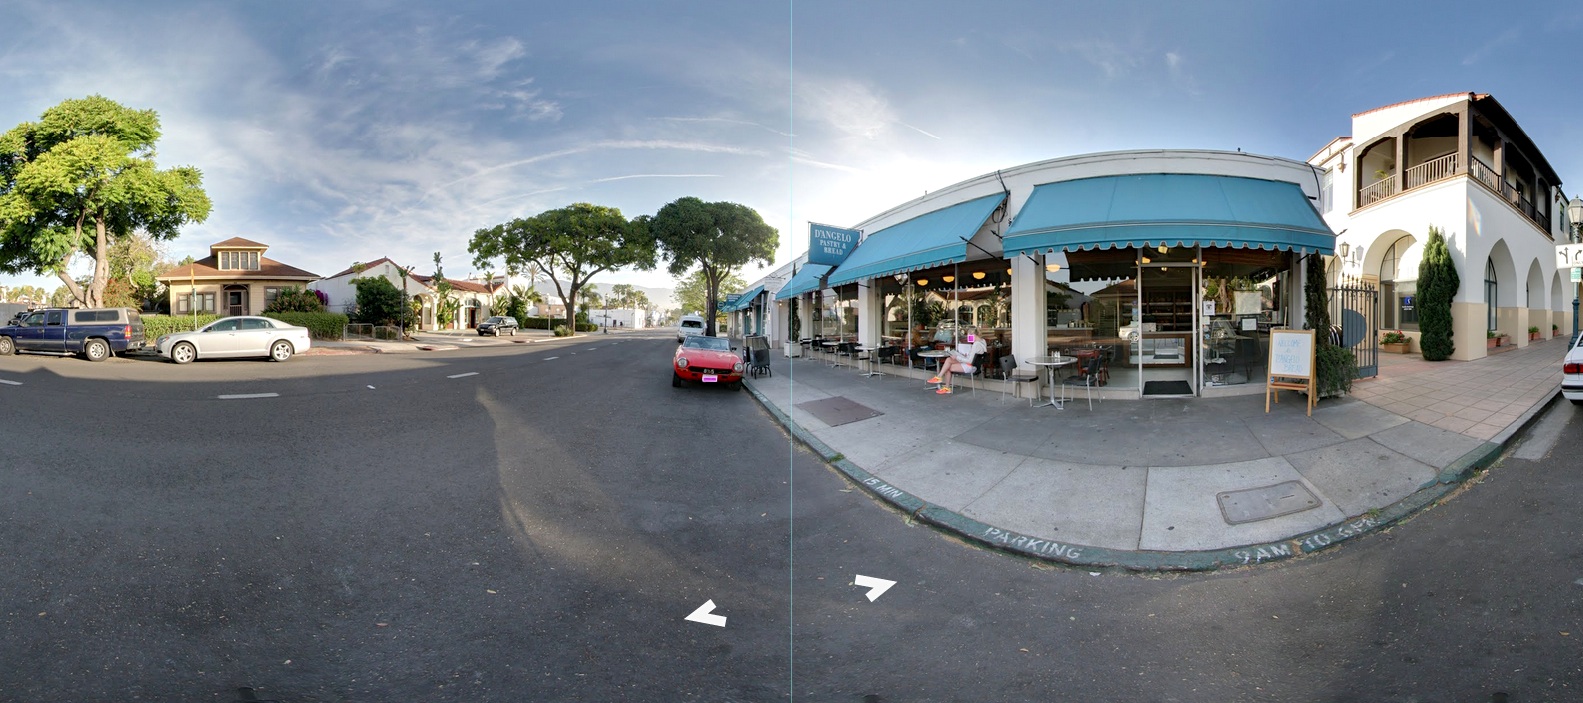 D'Angelo's Bread, best Bakery in Santa Barbara. Google Business View created by 805 Productions.